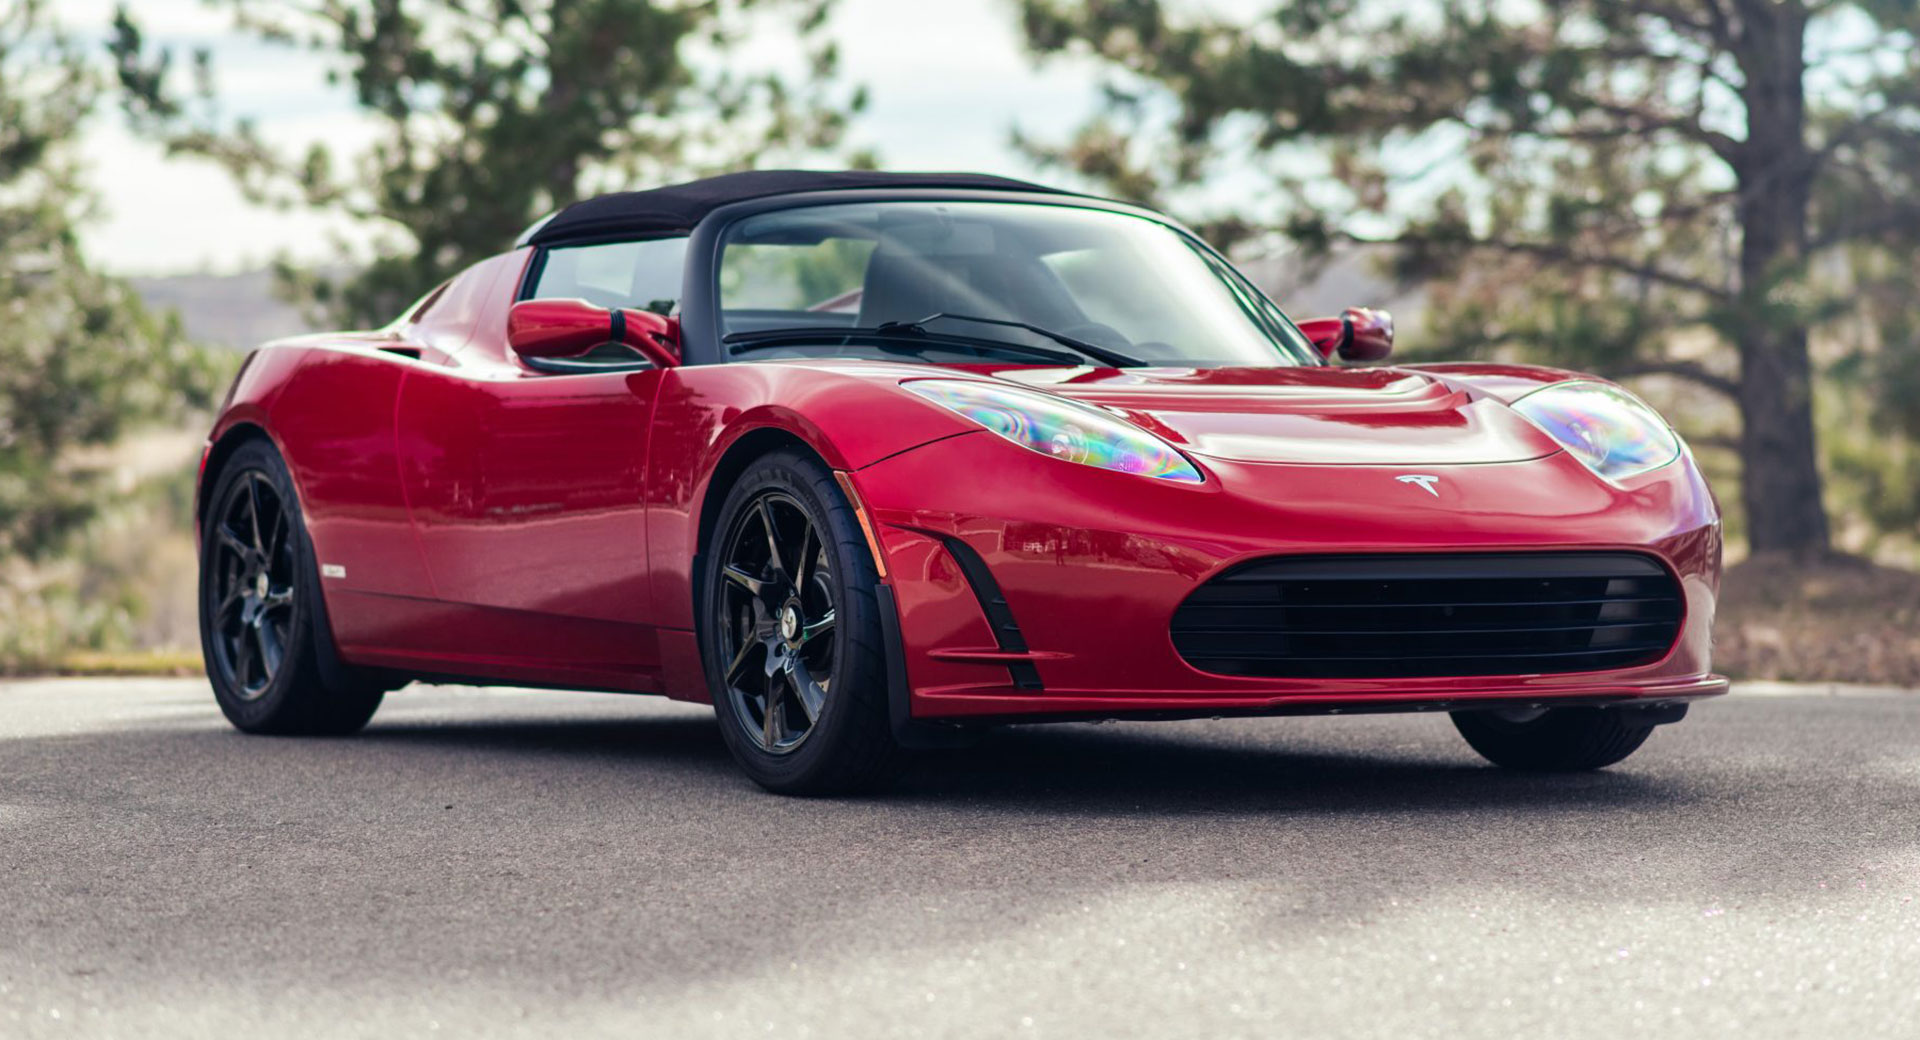 How Much Would You Pay For This Low-Mileage 2011 Tesla Roadster? | Carscoops